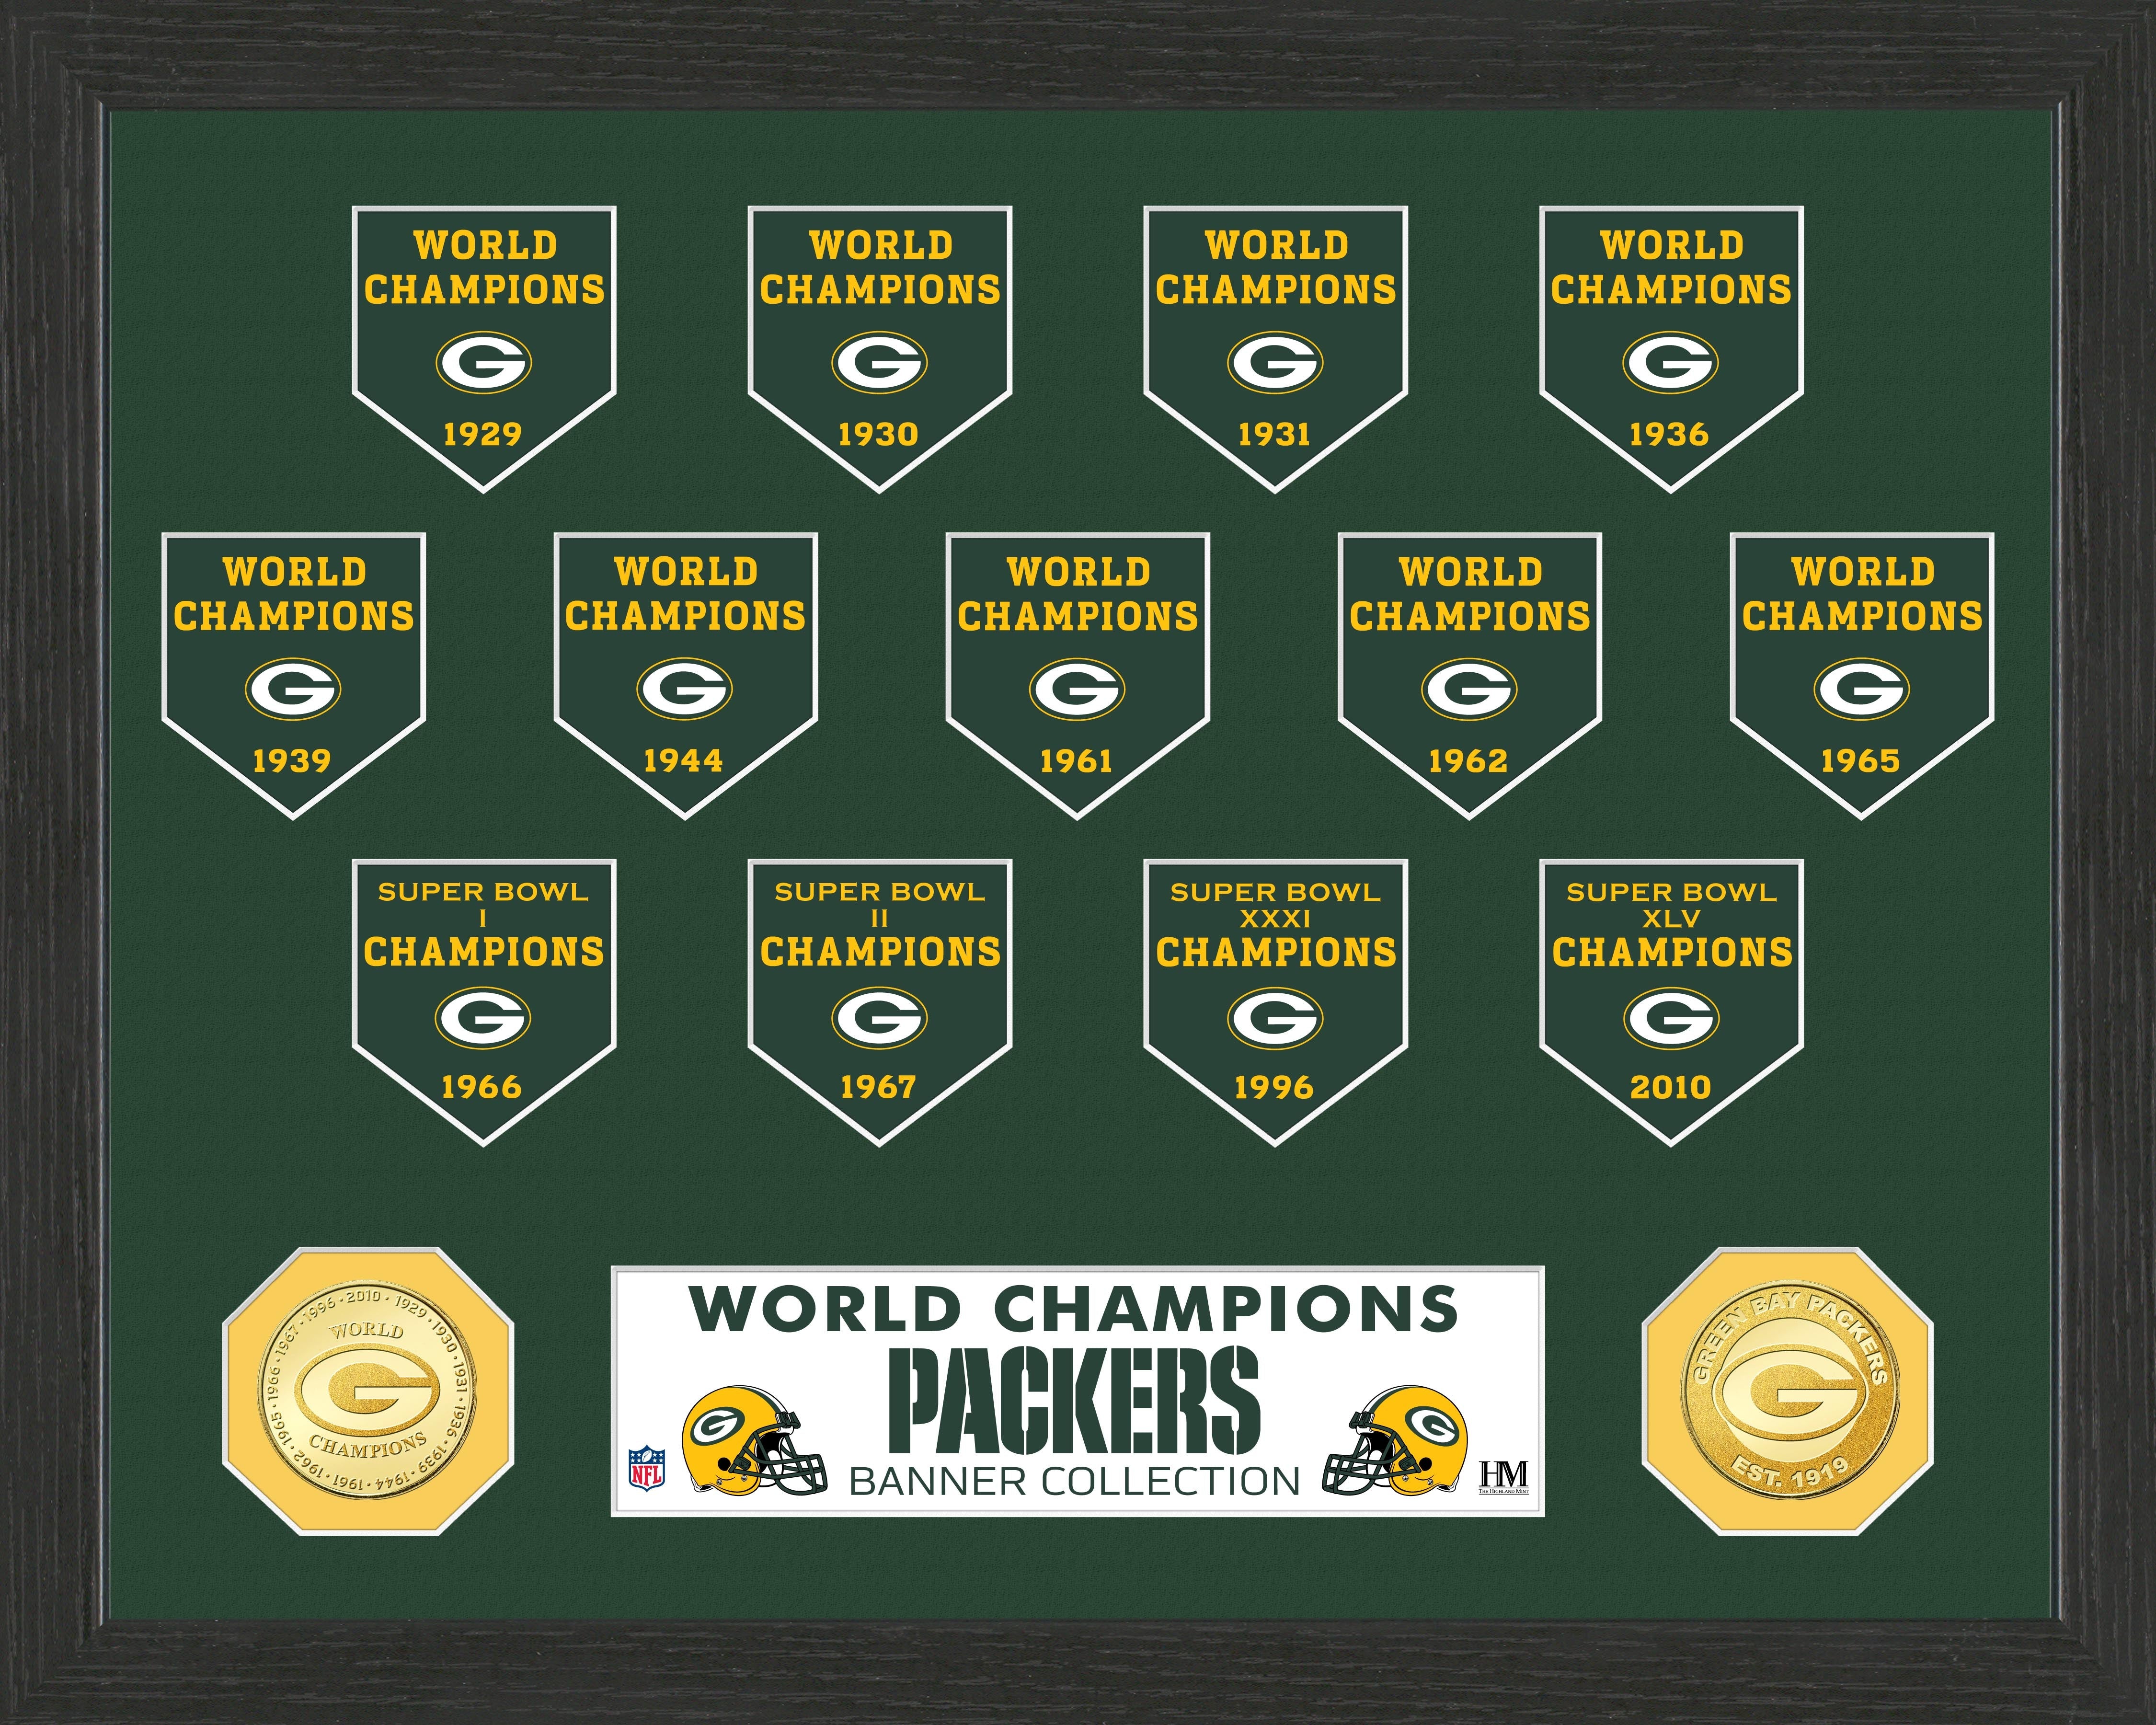 Green Bay Packers 13-Time World Champions Banner Bronze Coin Photo Mint